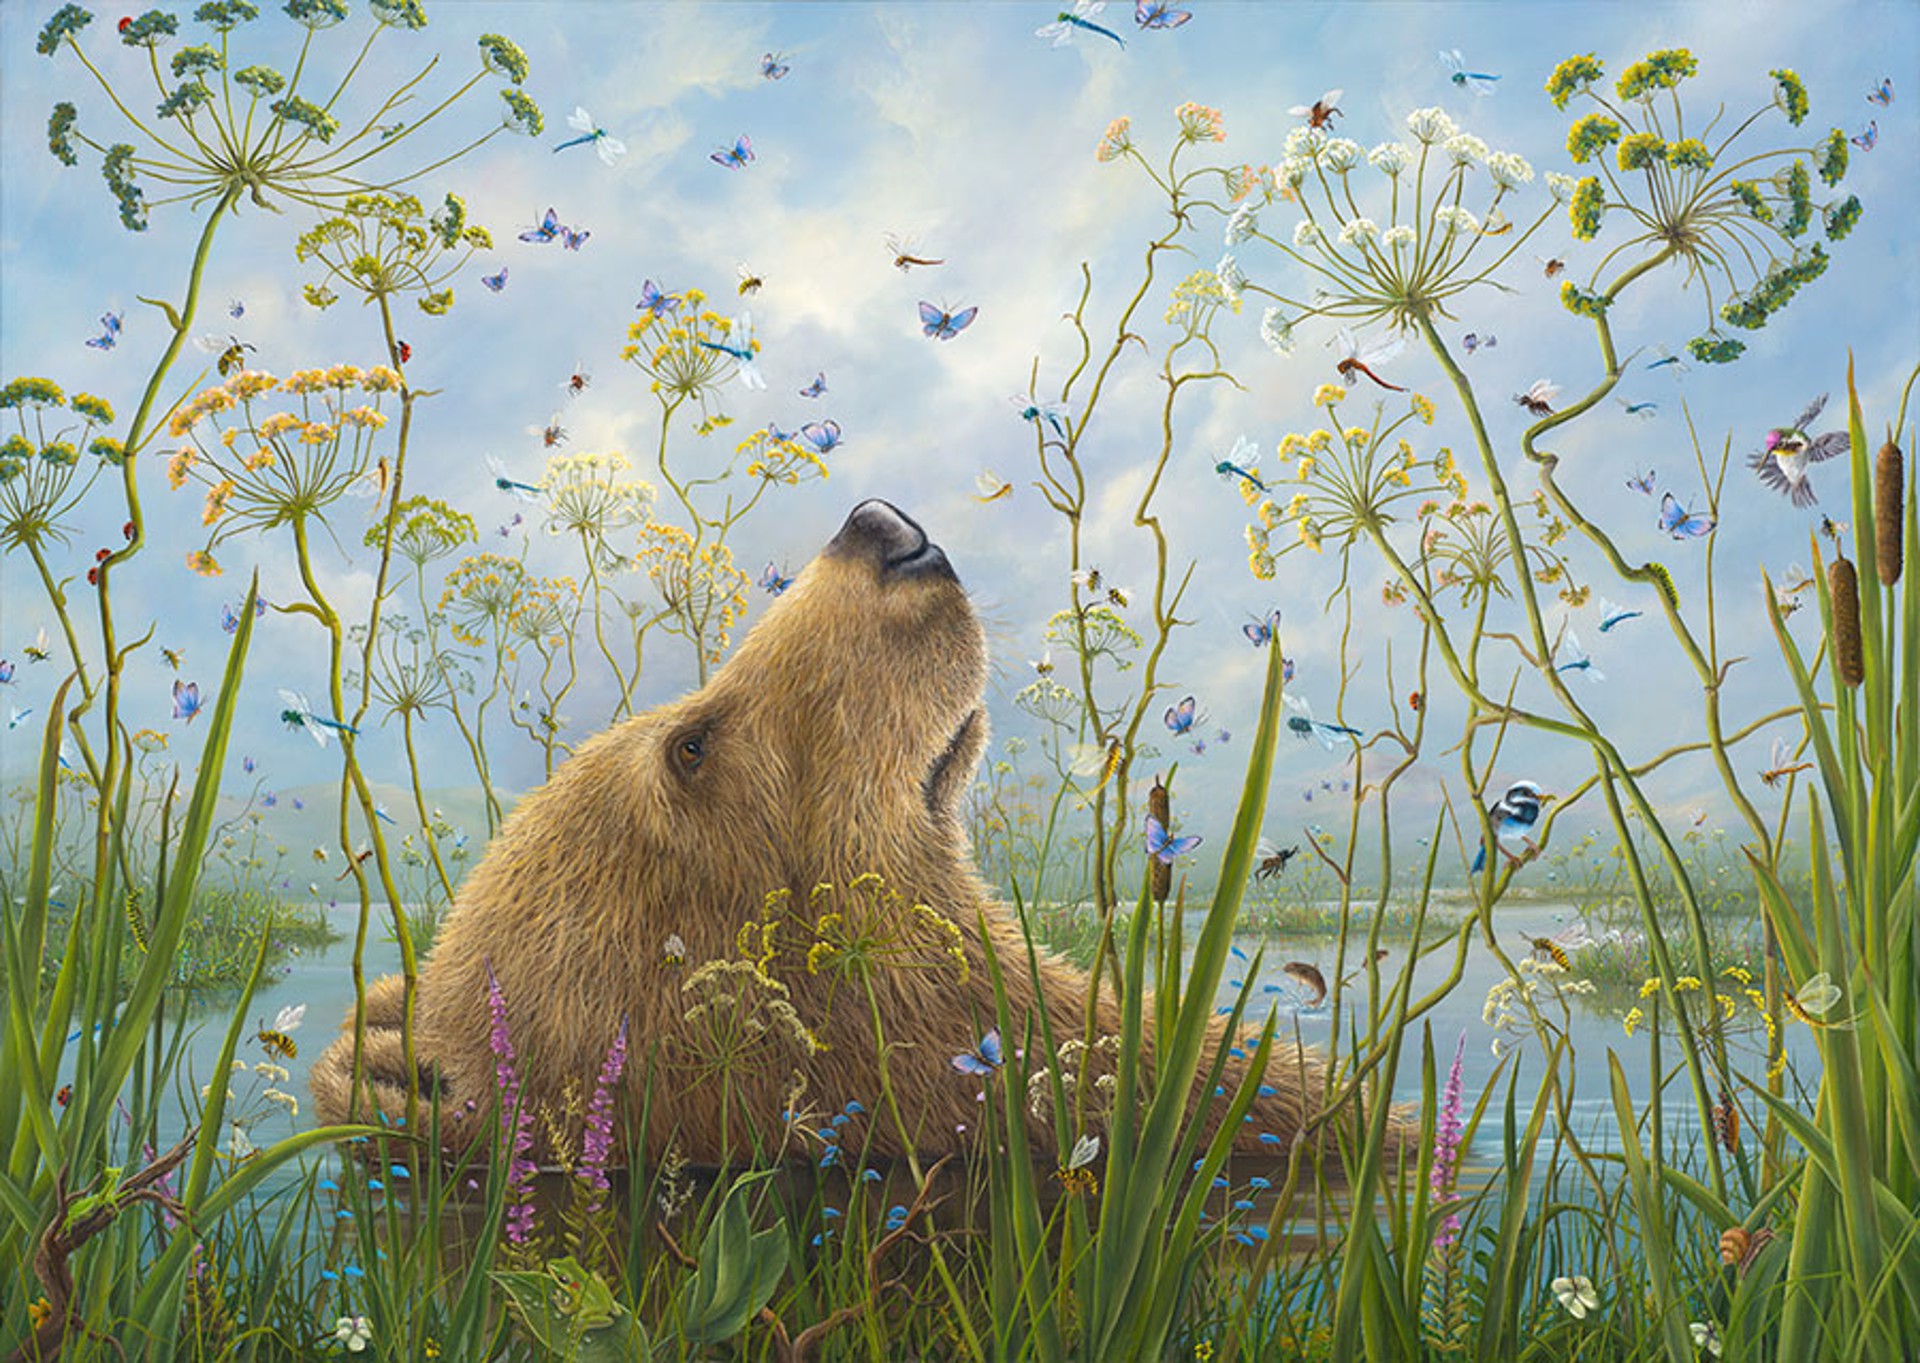 The Whole World (LAST ONE) by Robert Bissell